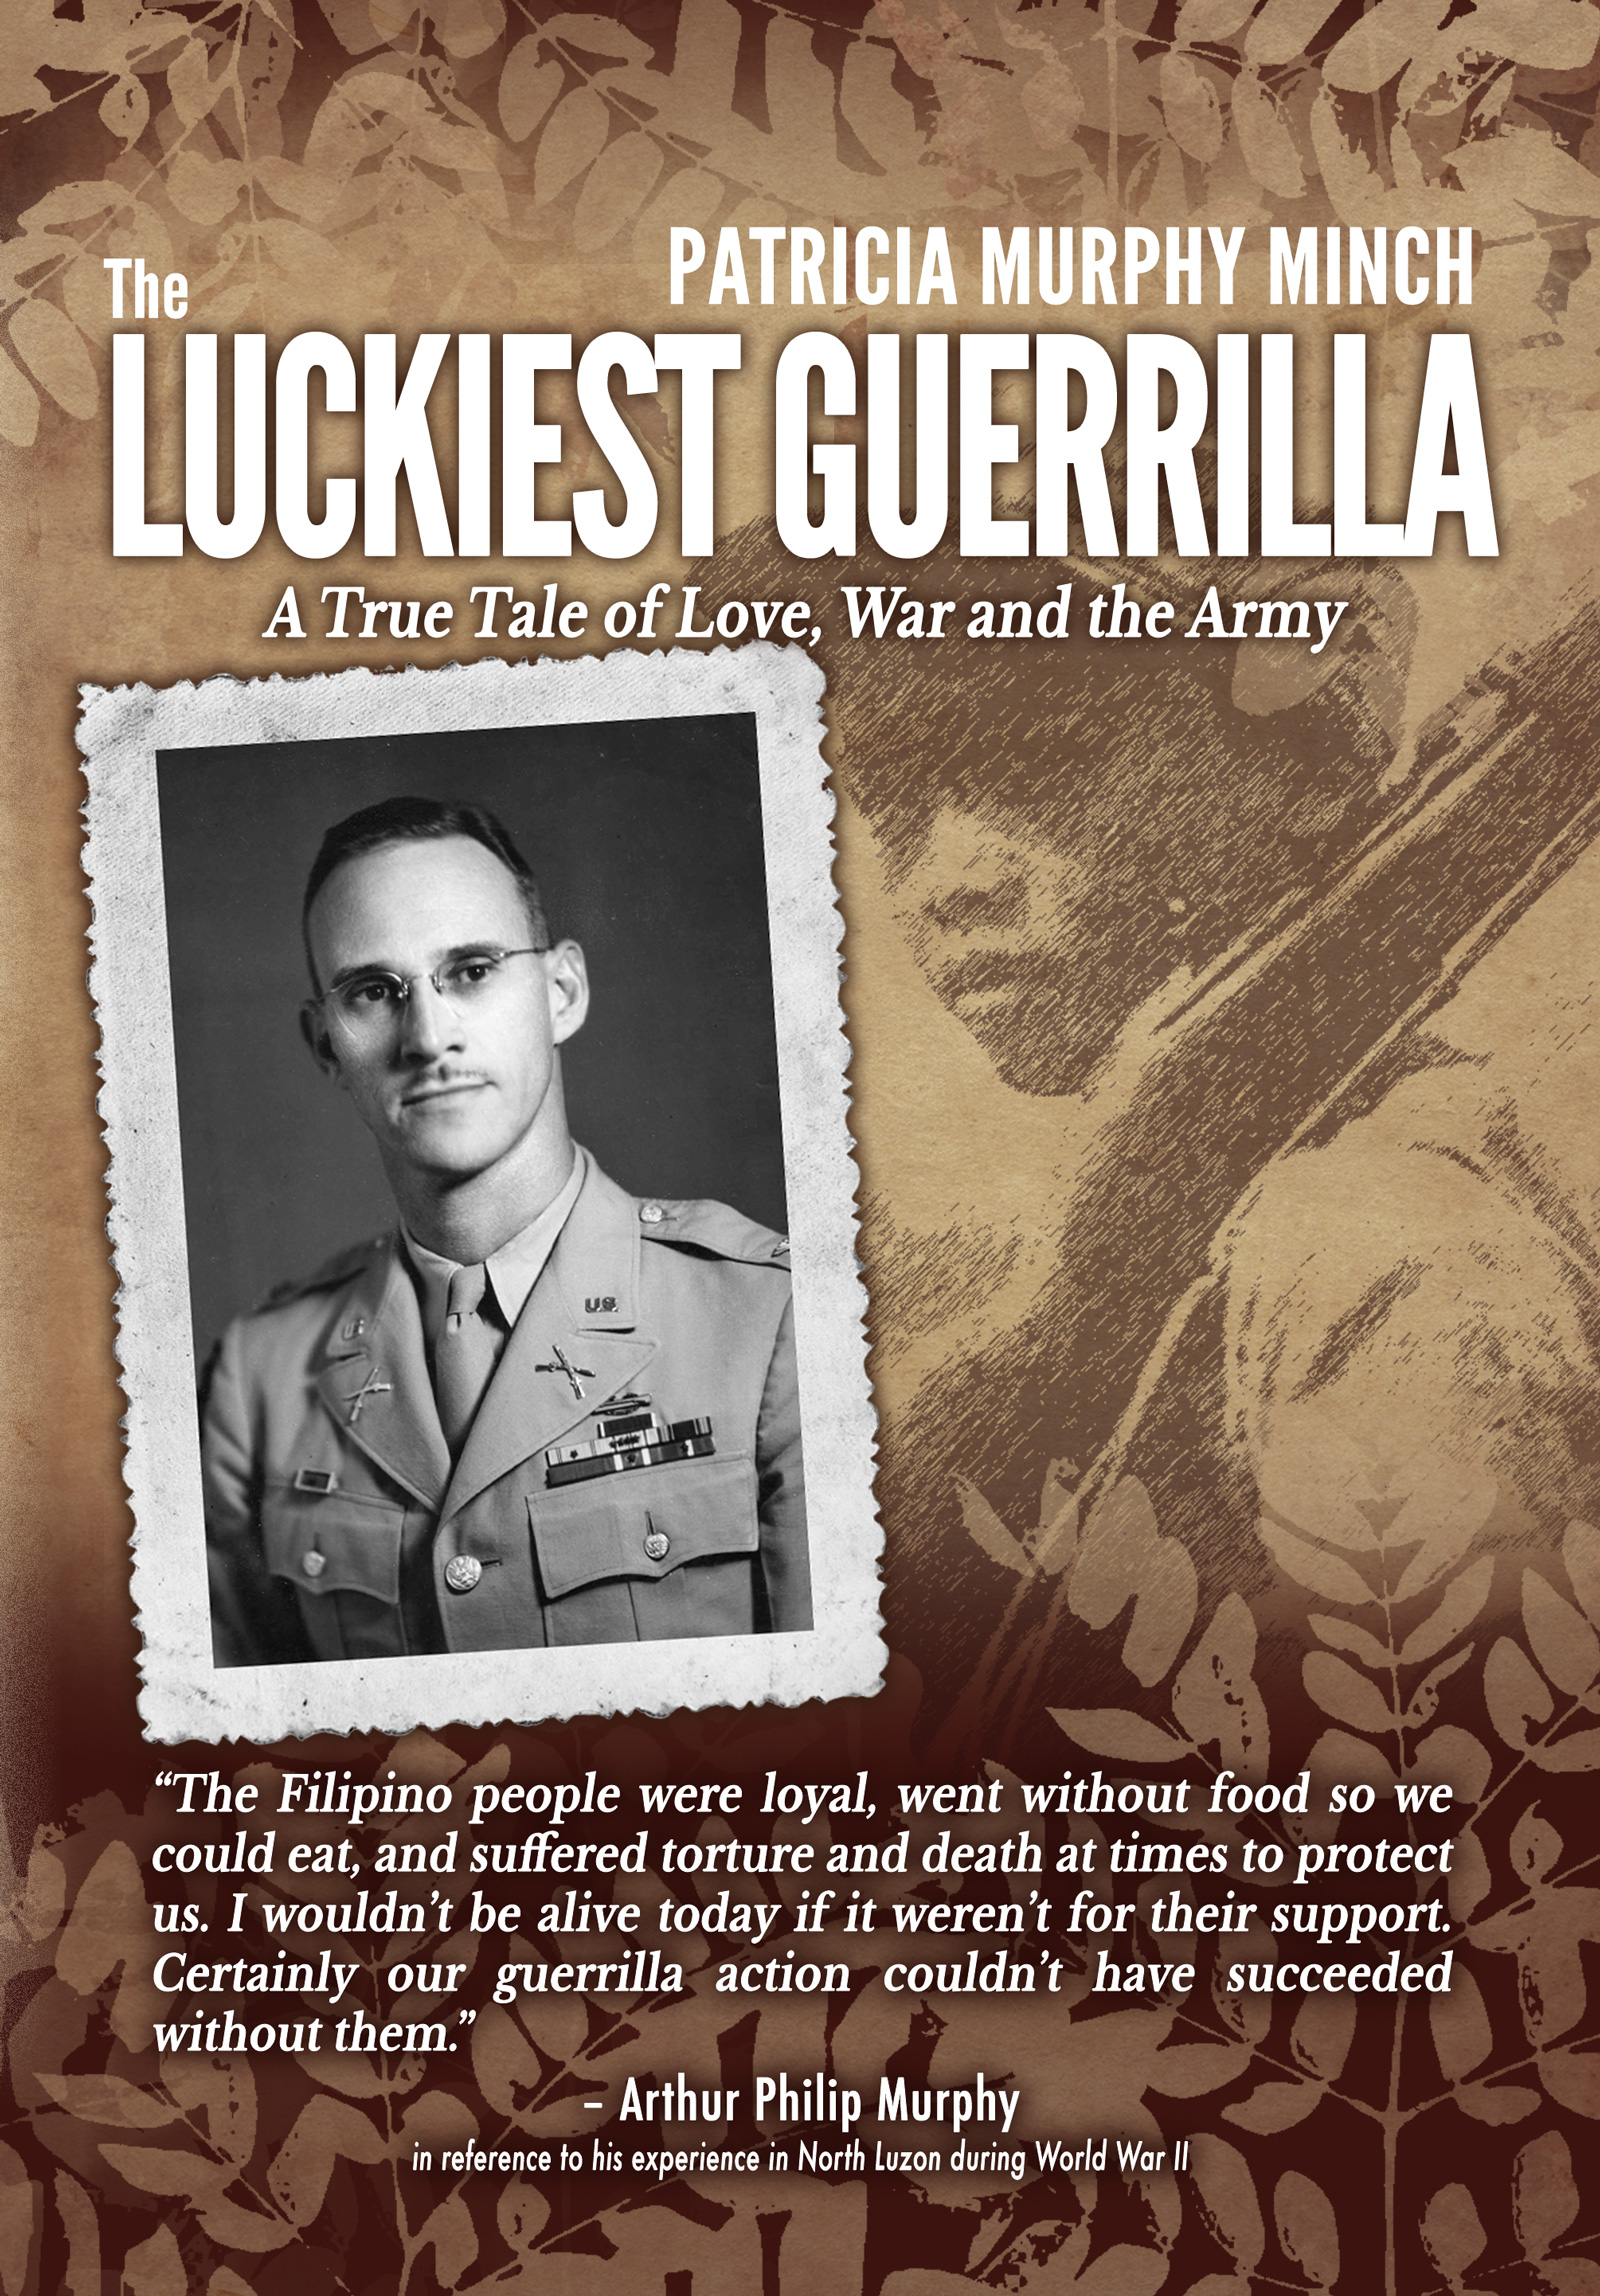 The Luckiest Guerrilla, A True Tale of Love, War and the Army (Creative Nonfiction)